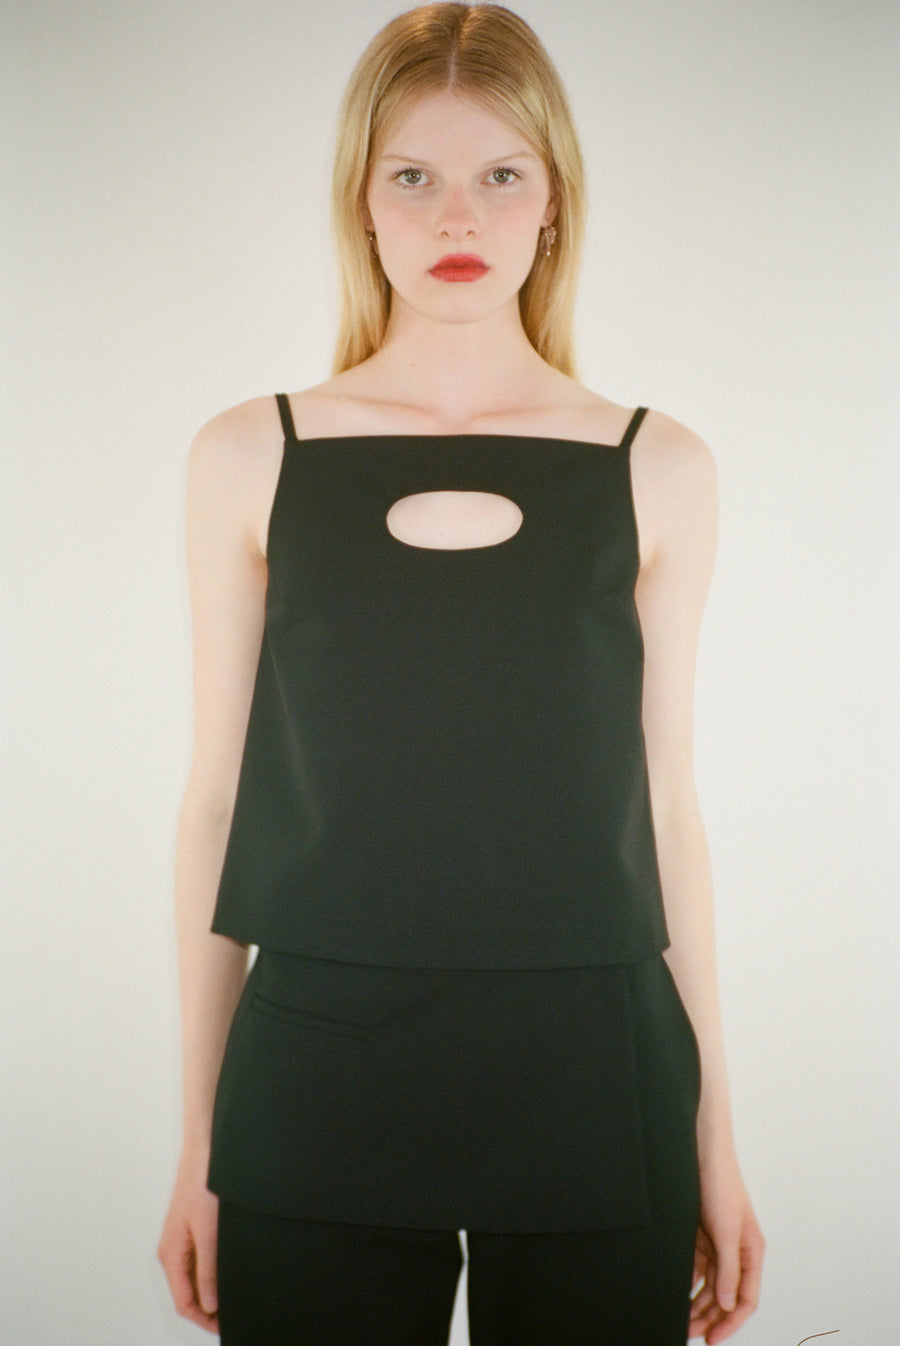 Boxy top in black suiting fabric with cut out detail at front on model